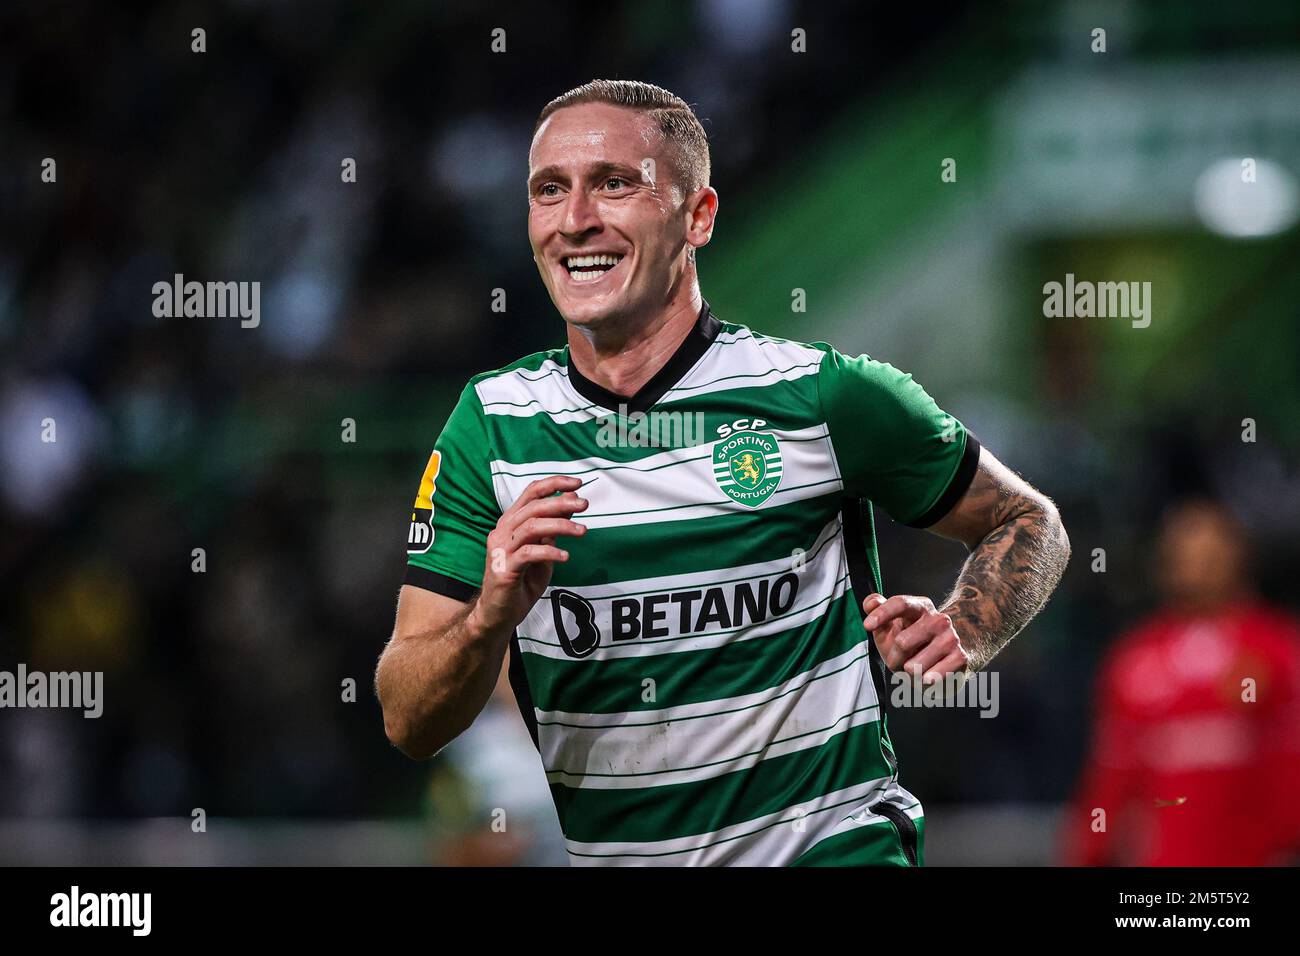 https://c8.alamy.com/comp/2M5T5Y2/nuno-santos-of-sporting-cp-celebrates-a-goal-during-the-liga-portugal-bwin-match-between-sporting-cp-and-paos-de-ferreira-at-estadio-jose-alvaladefinal-score-sporting-cp-30-fc-paos-de-ferreira-photo-by-david-martins-sopa-imagessipa-usa-2M5T5Y2.jpg